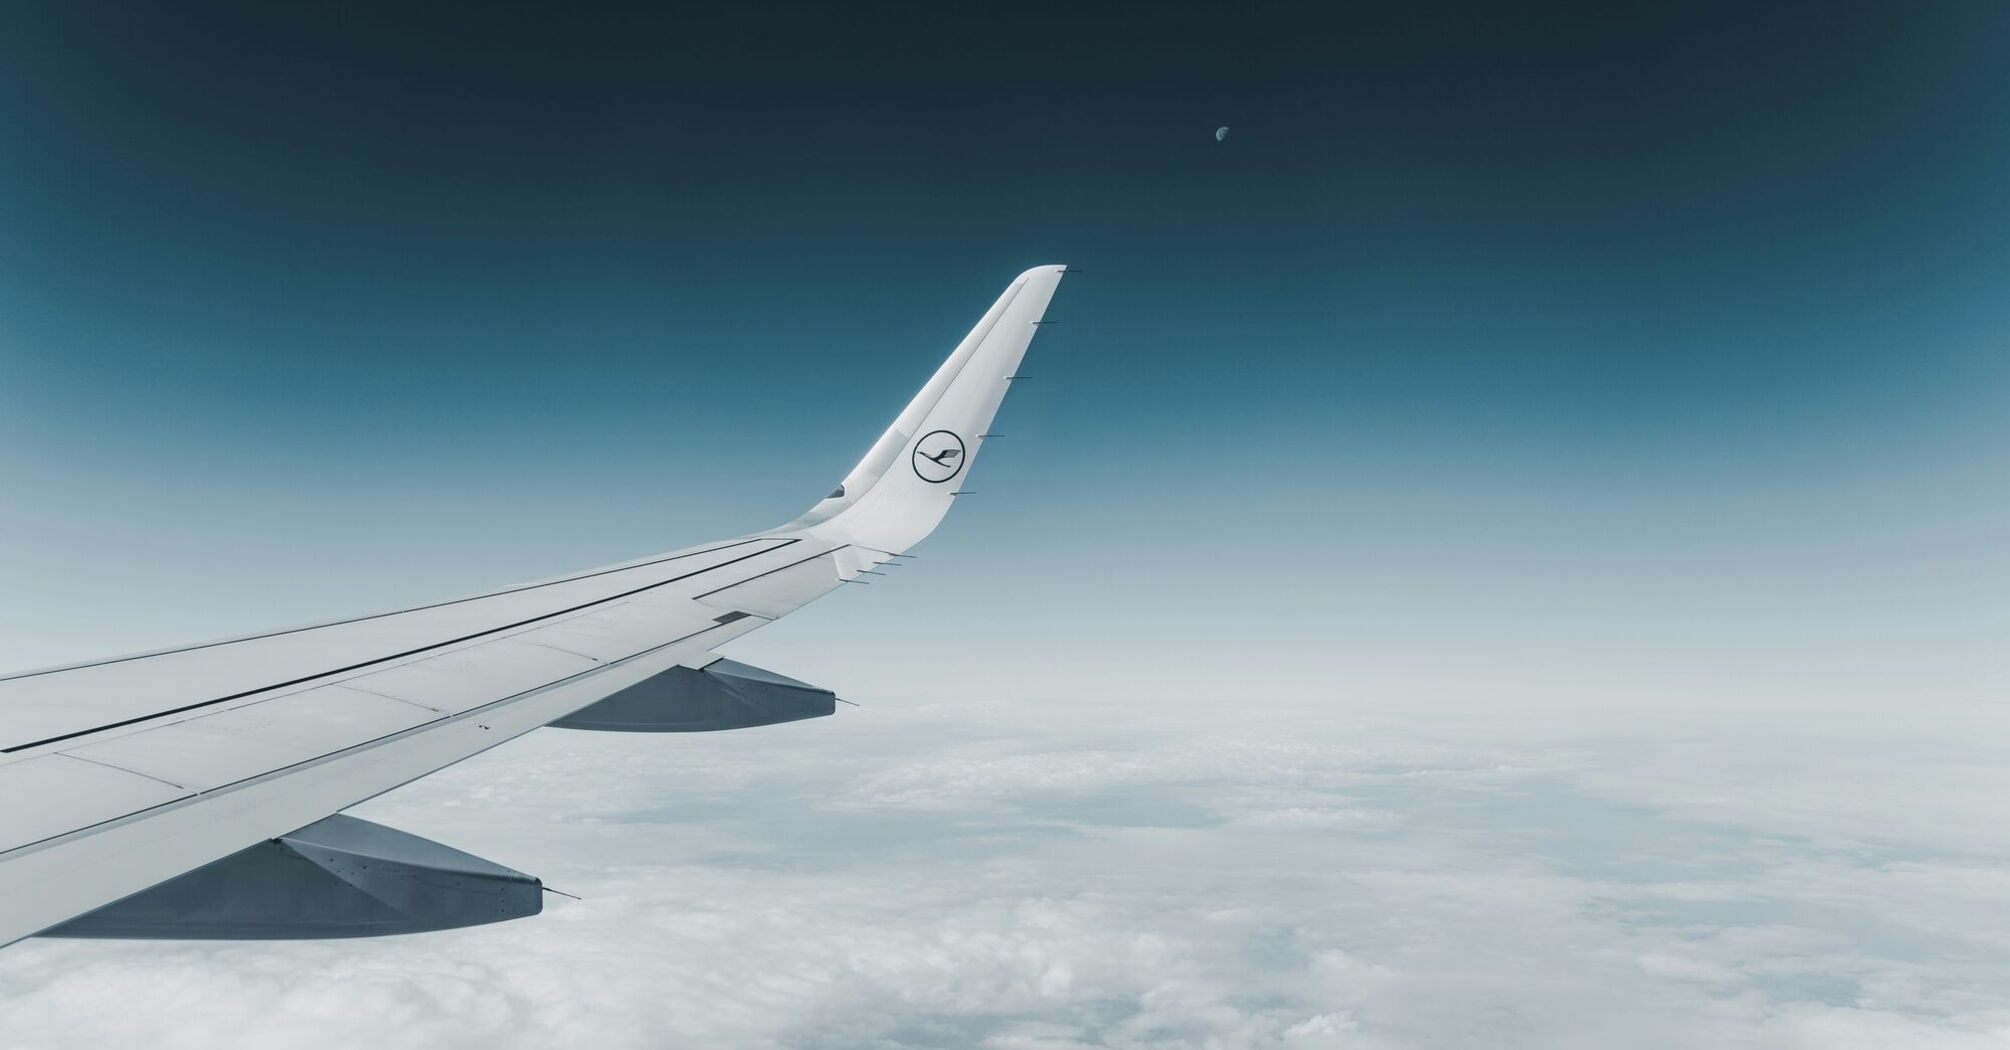 View of an airplane wing with the Lufthansa logo mid-flight against a clear sky, with a crescent moon in the distance